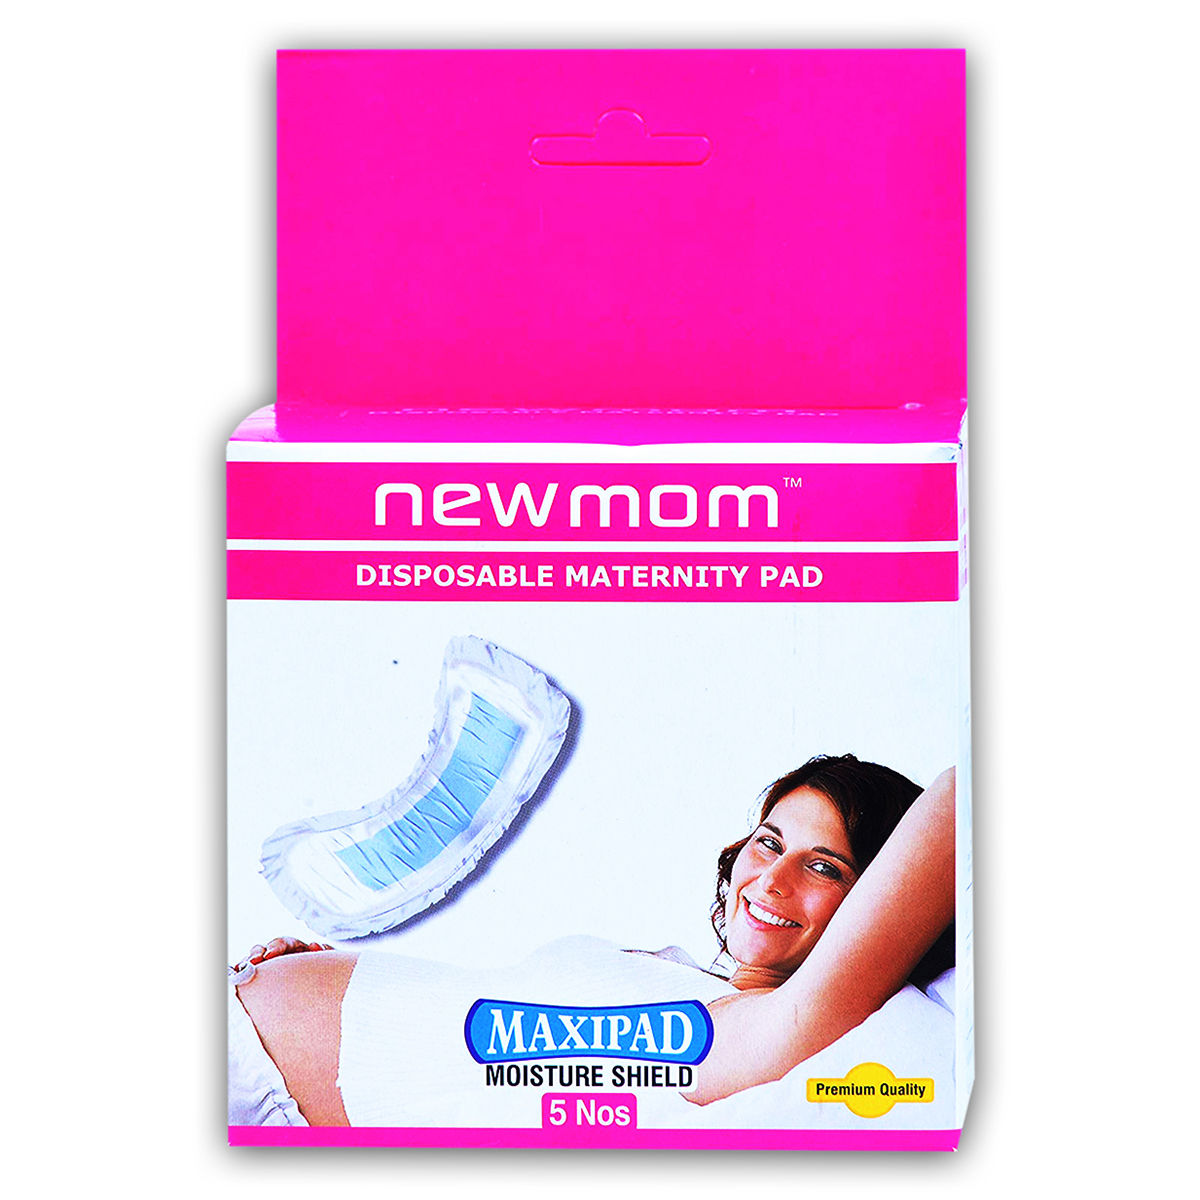 Newmom Disposable Maternity Maxipad Price, Uses, Side Effects, Composition  - Apollo Pharmacy